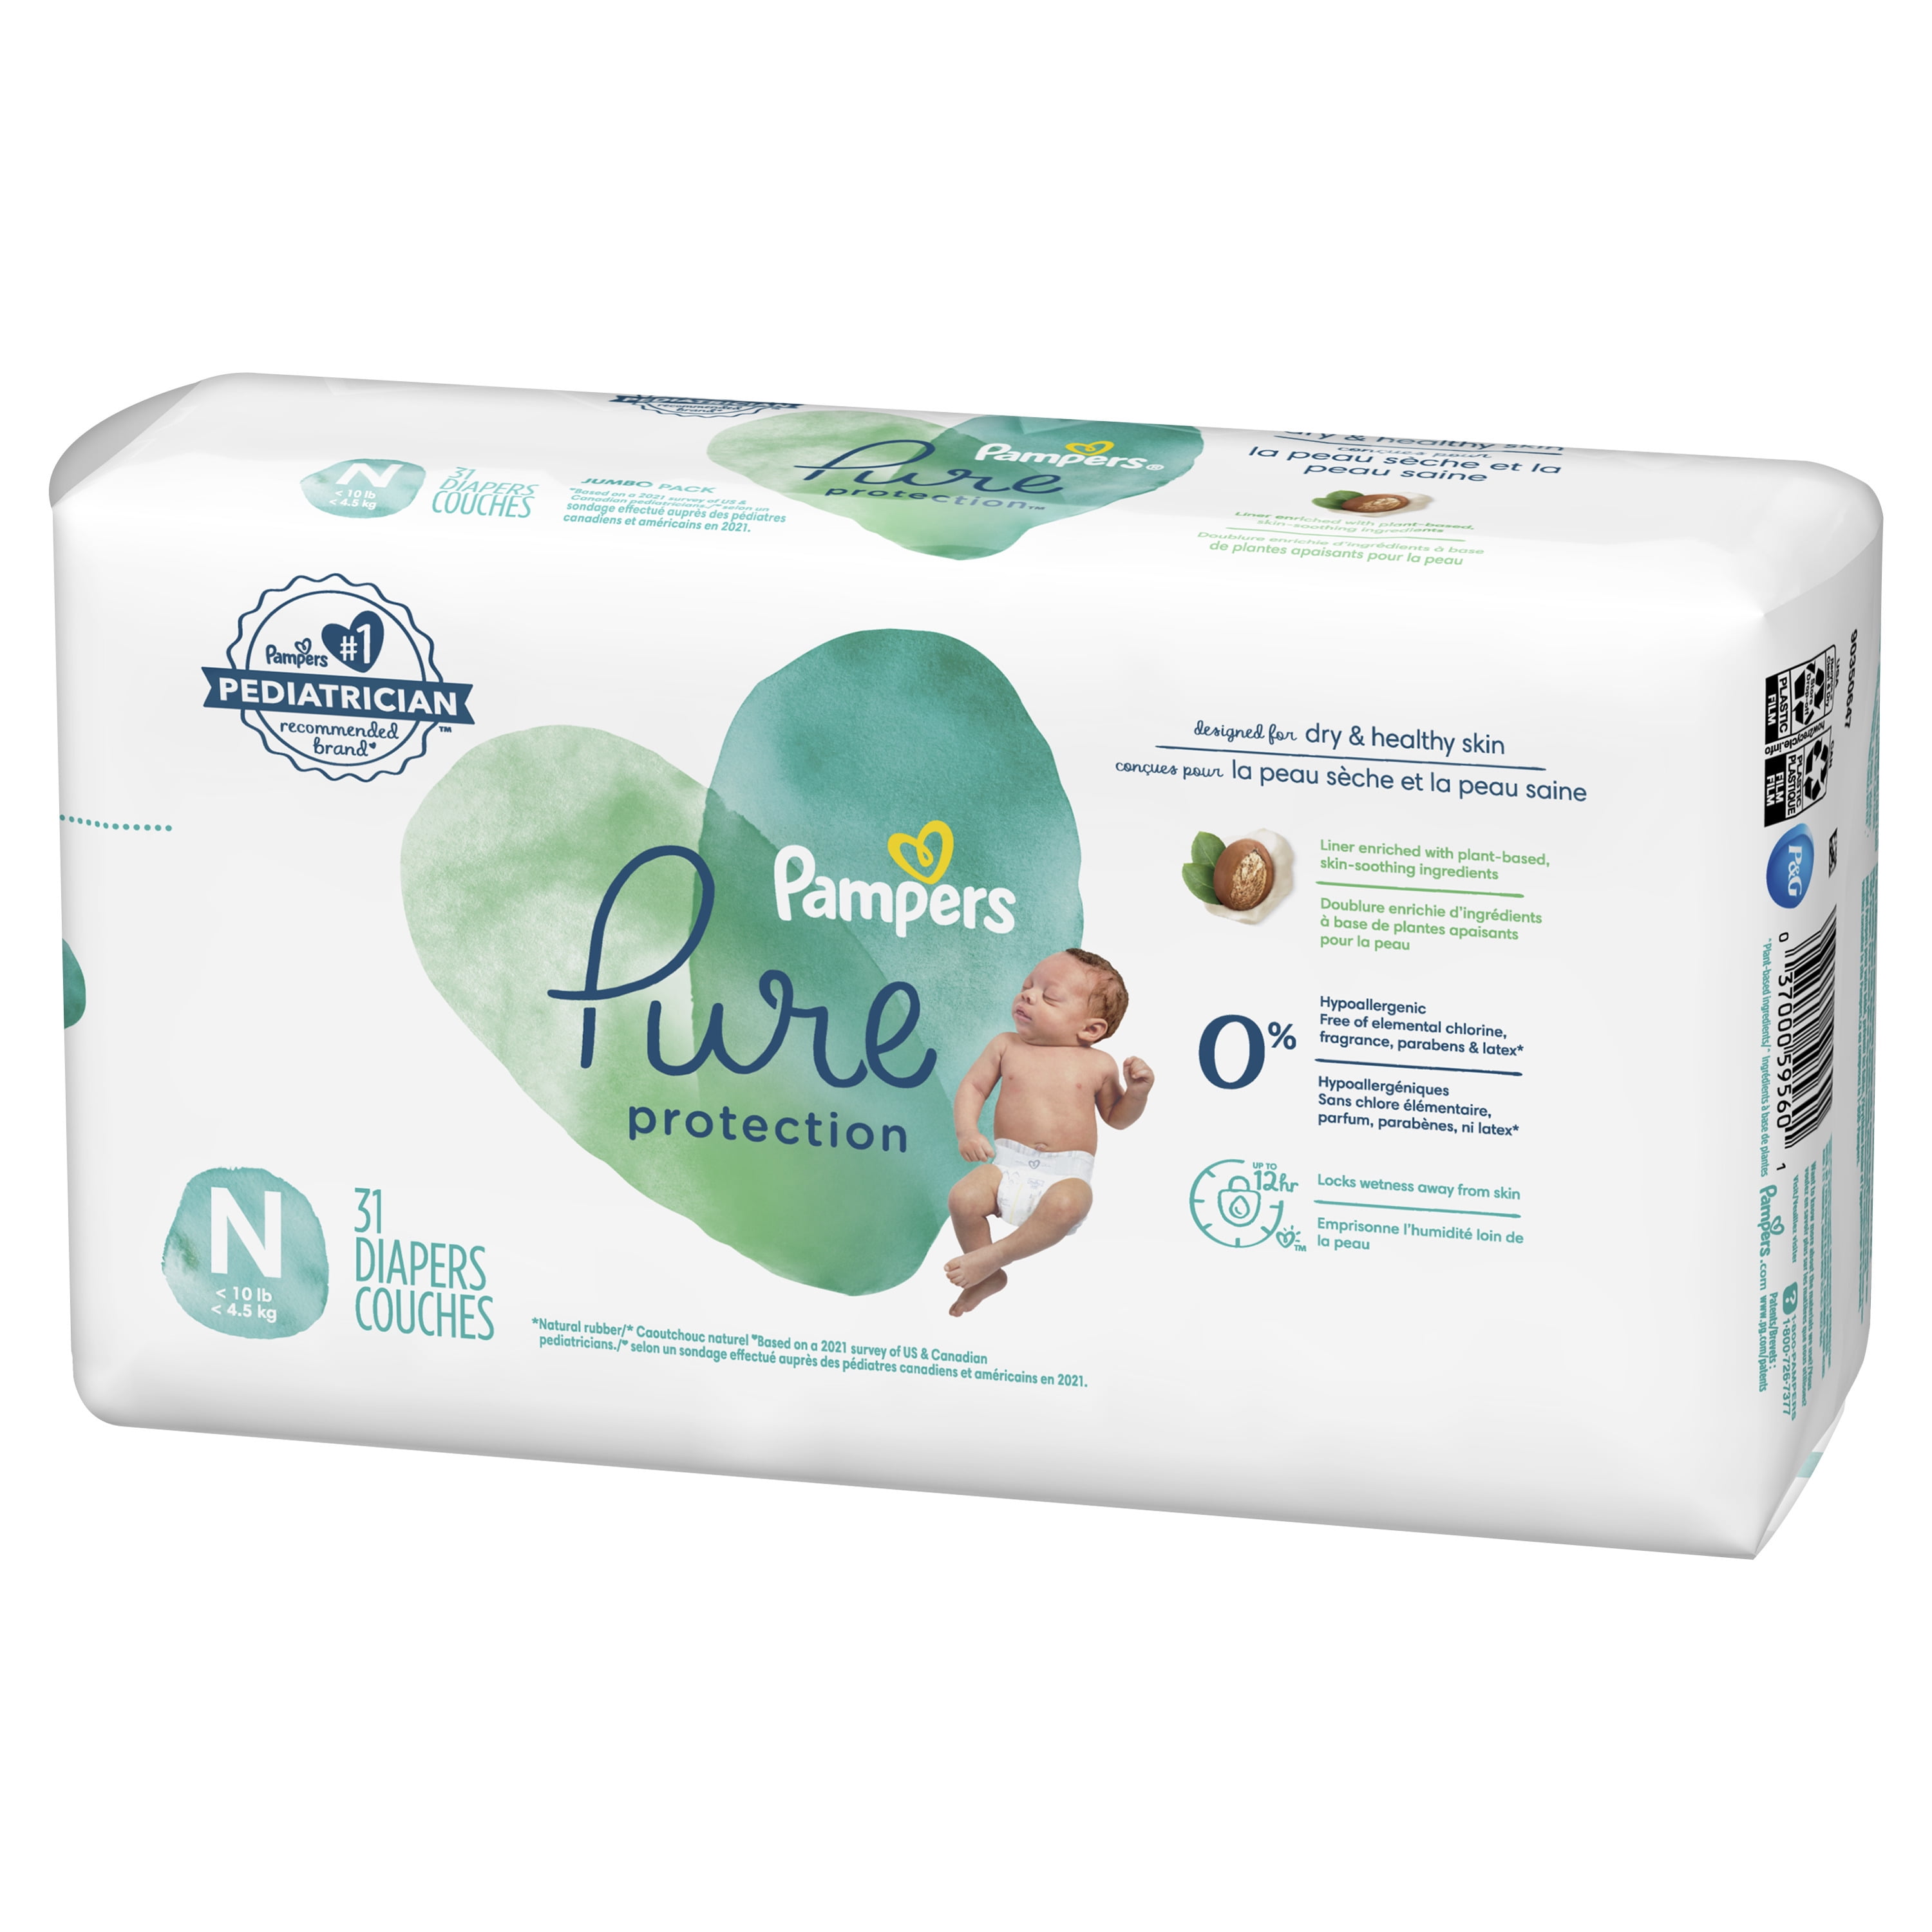  Pampers Pure Protection Diapers Newborn - Size 0, 76 Count,  Hypoallergenic Premium Disposable Baby Diapers : Baby